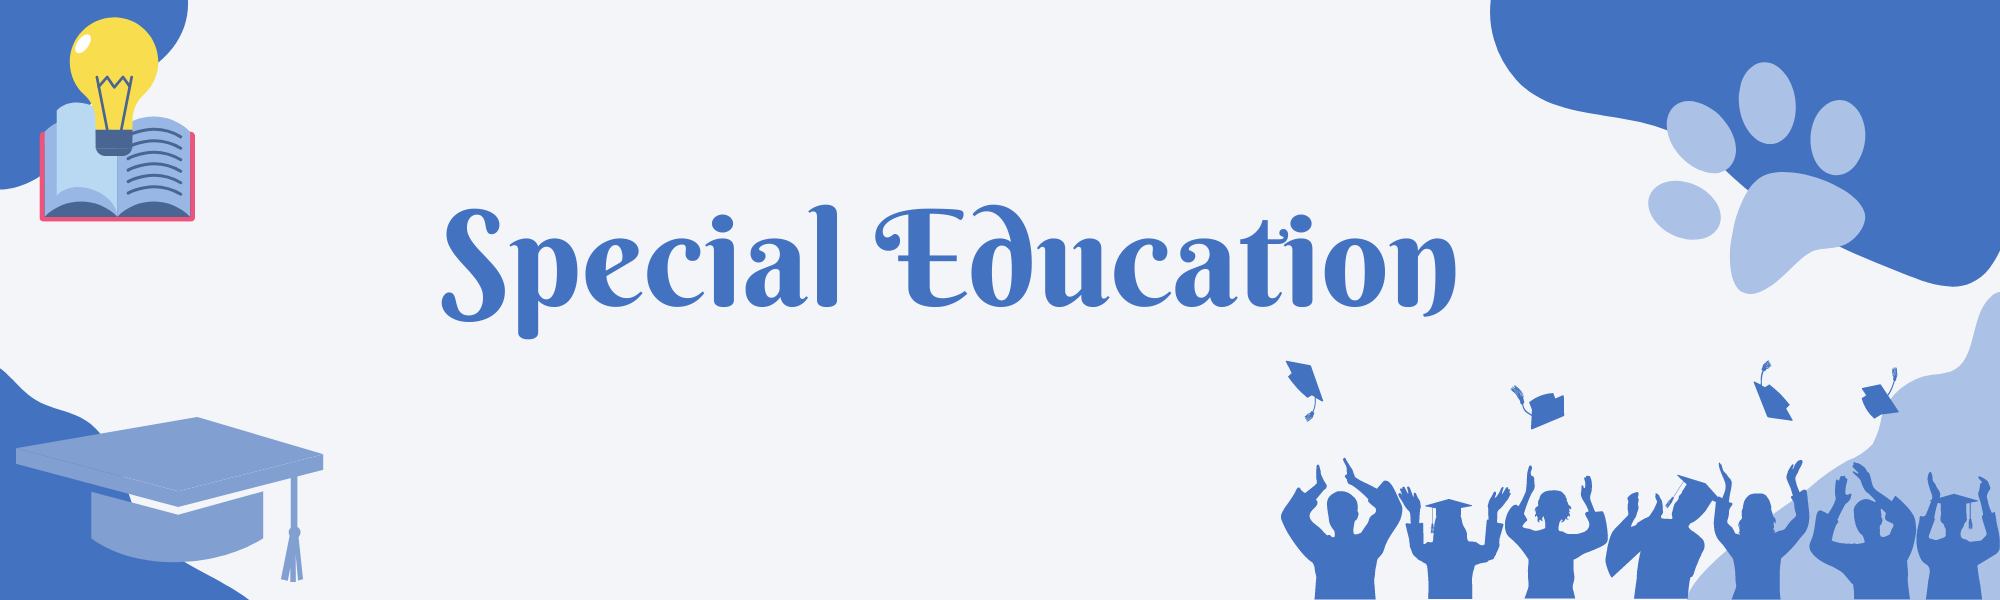 Header with graduation cap, silhouettes throwing up graduation caps, lightbulb over a book, paw print with text "special education"